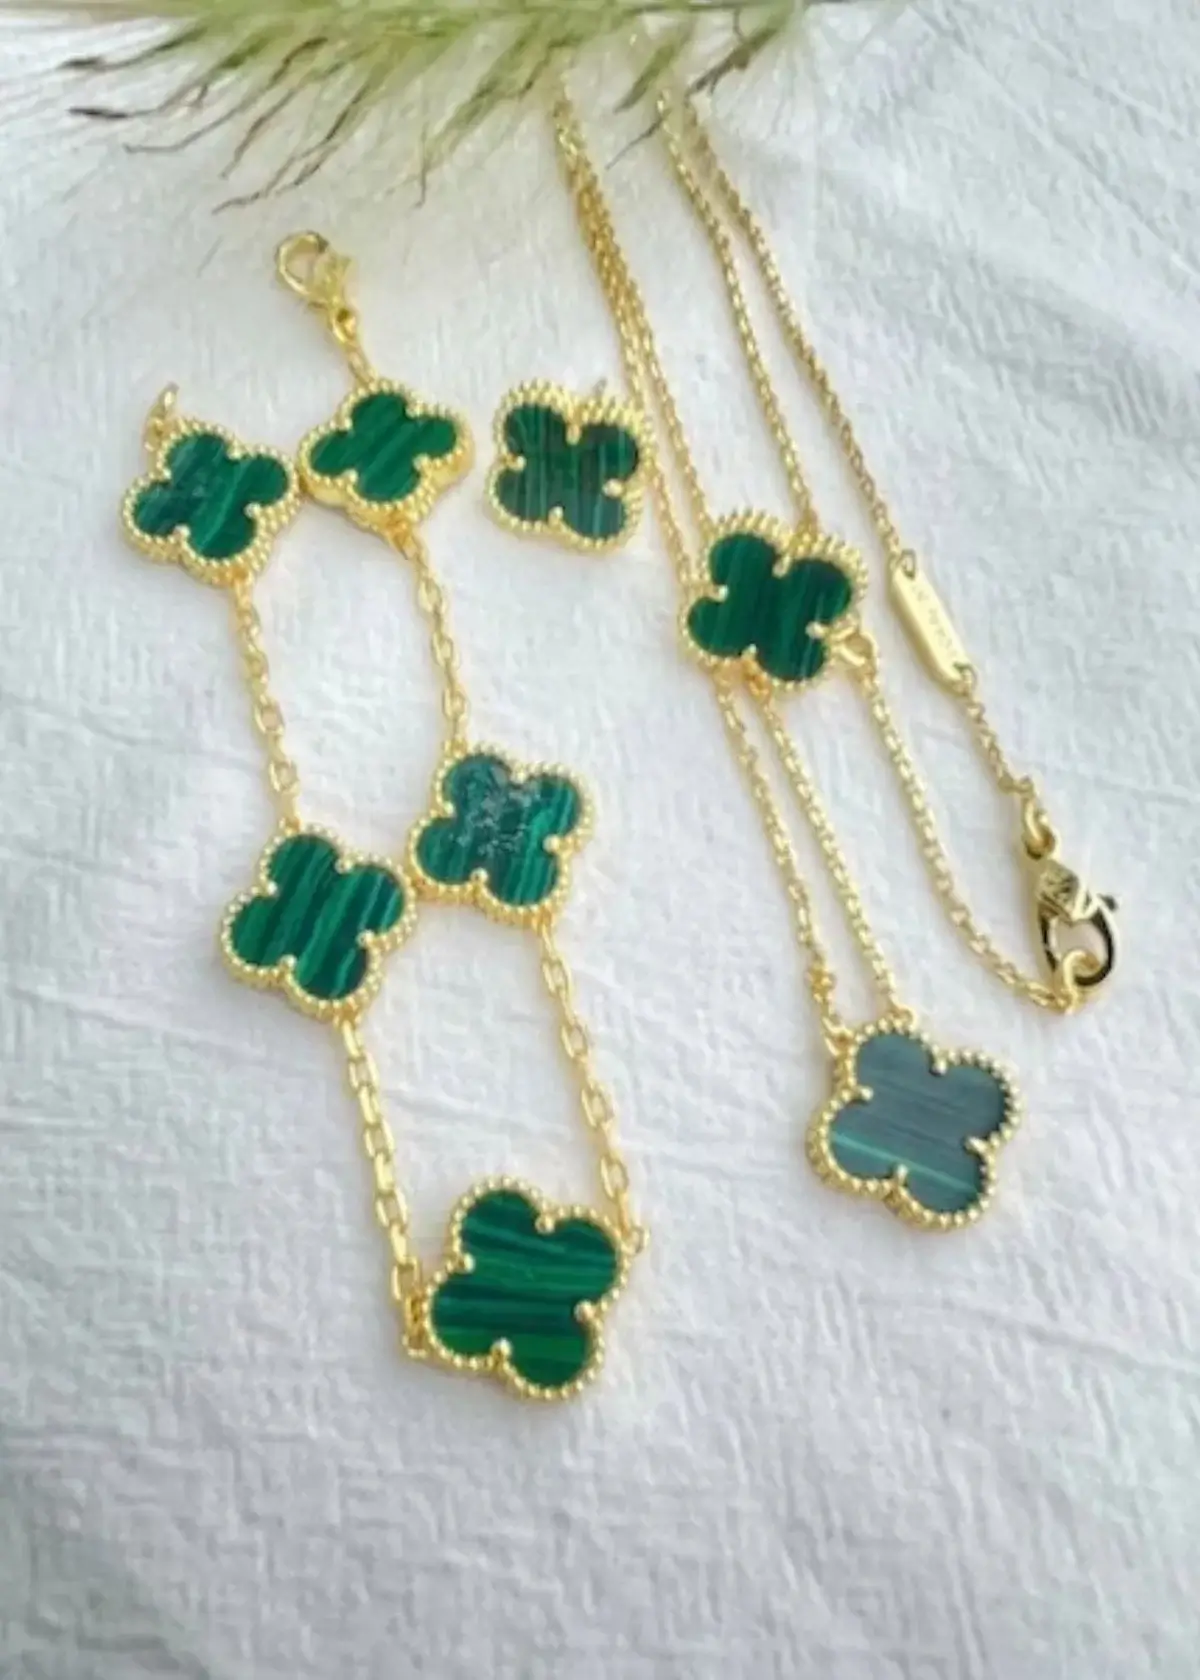 How to choose the right Clover Bracelet?